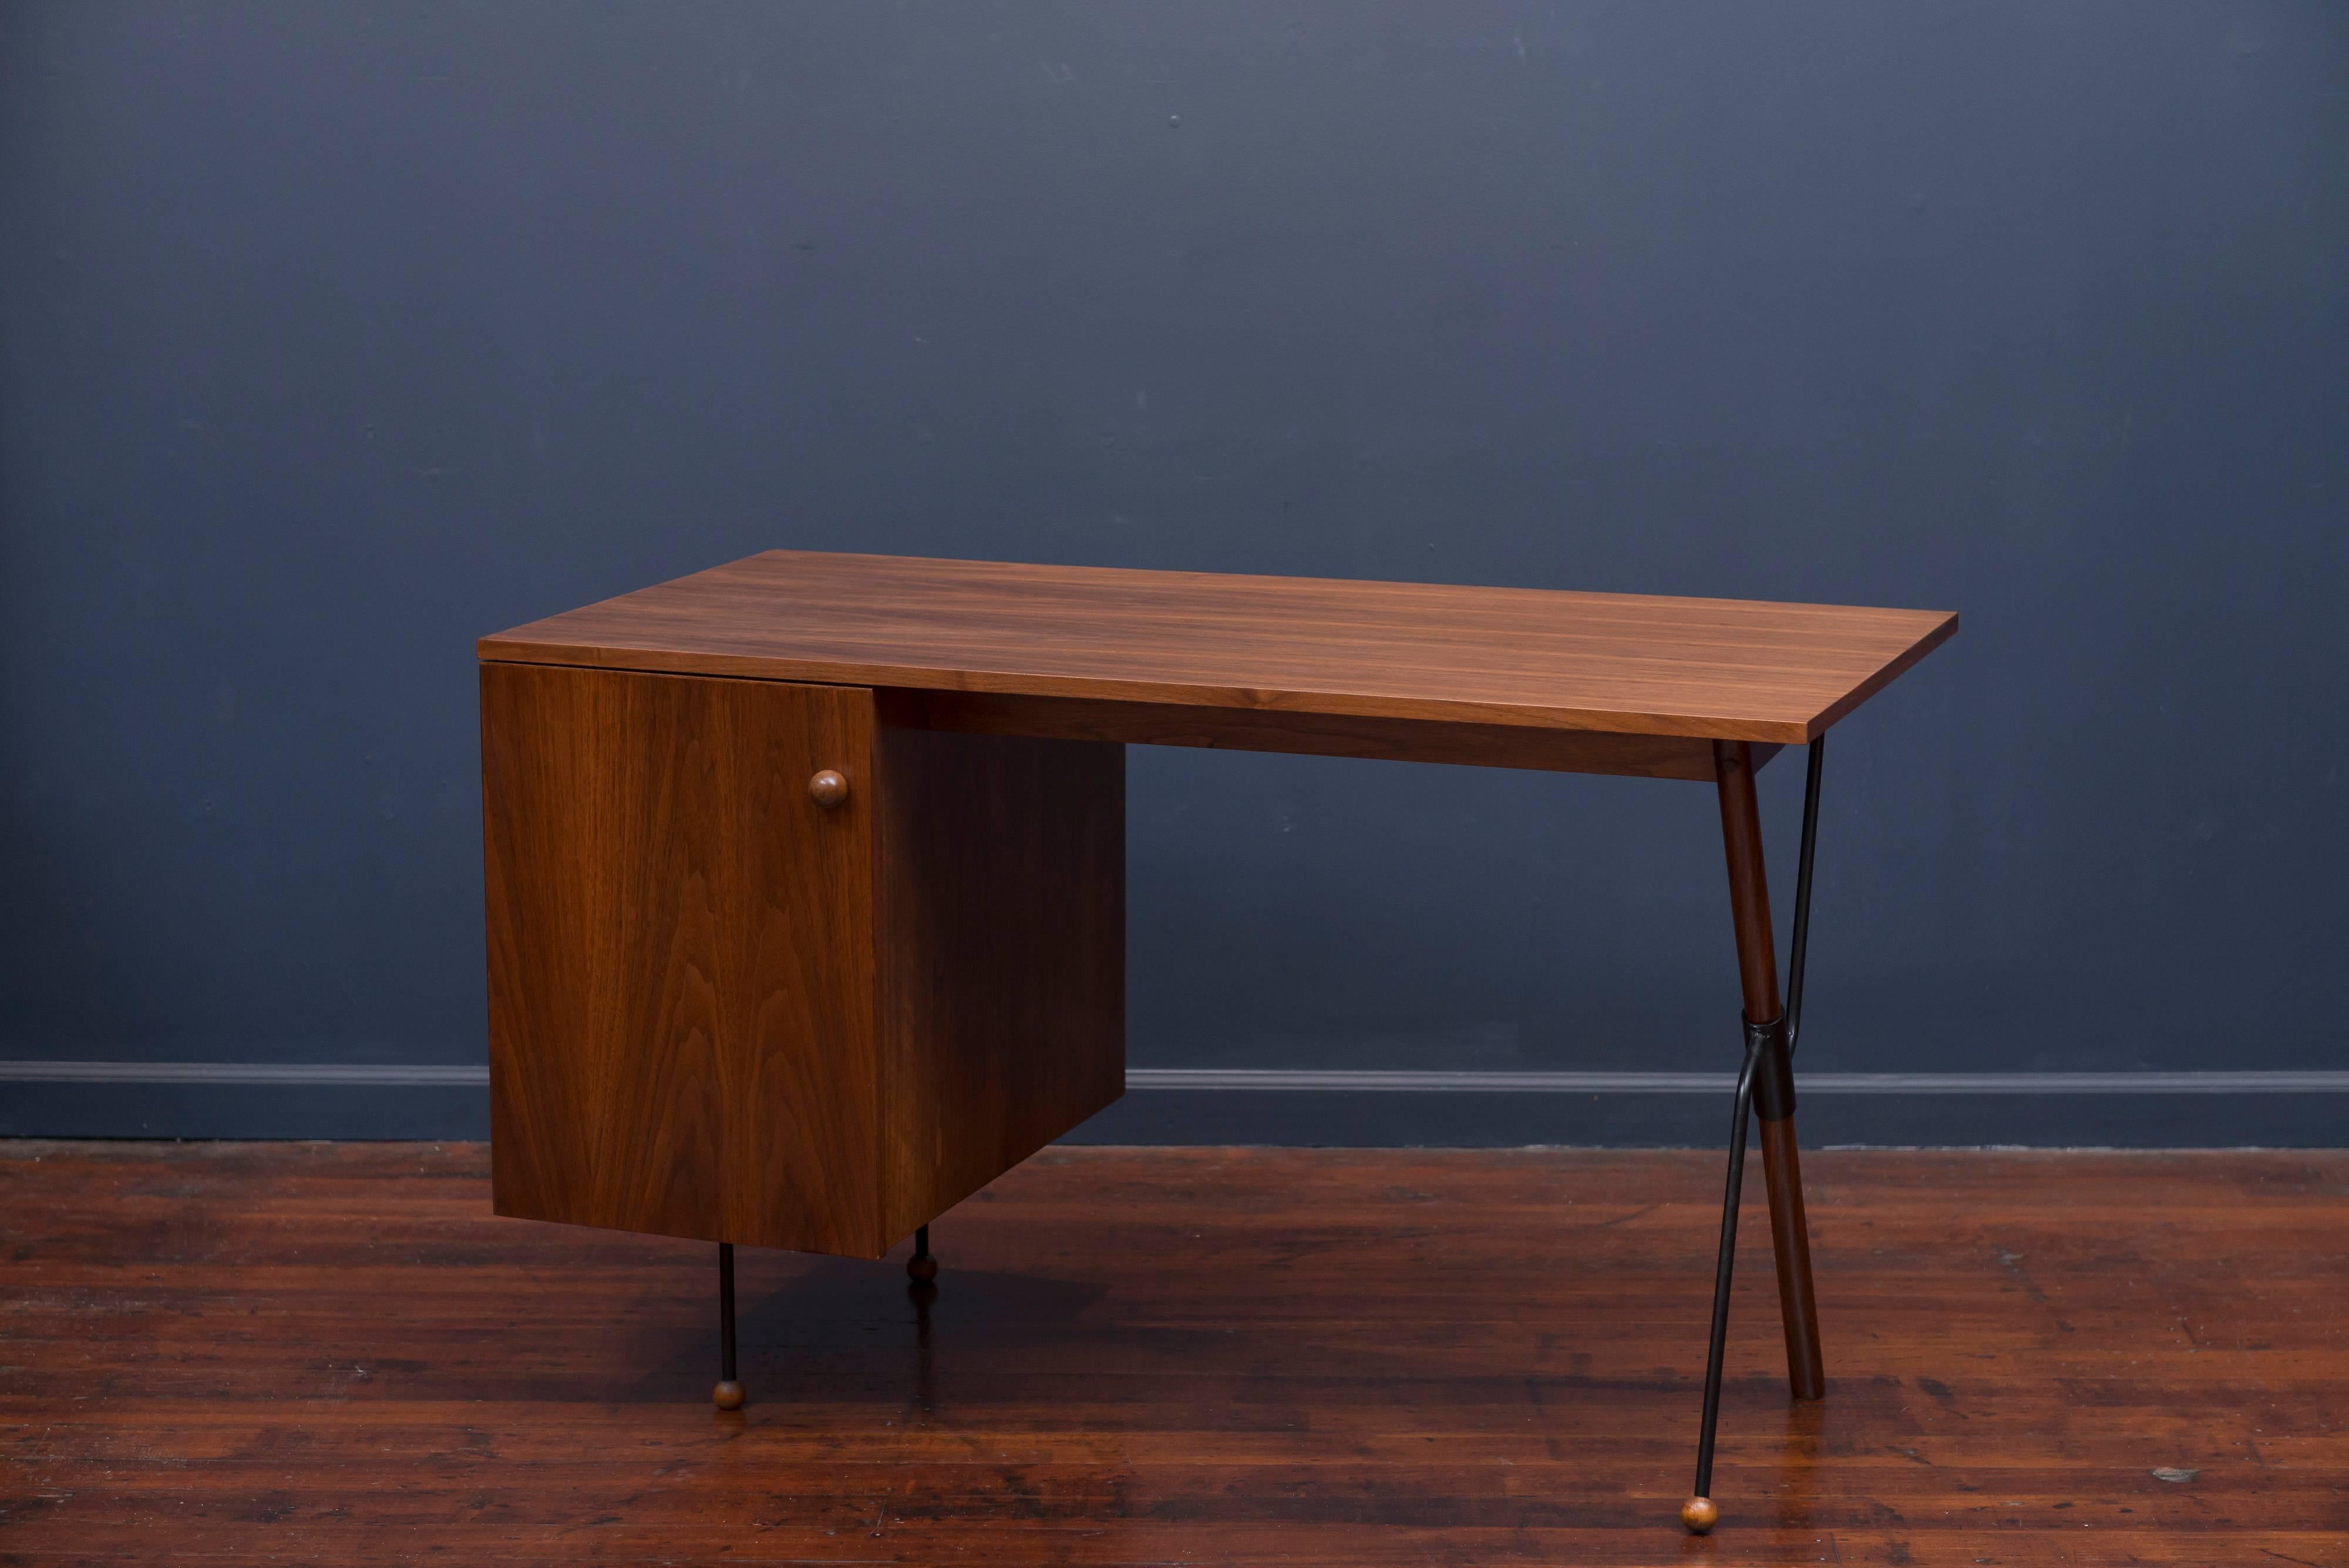 Greta Grossman designed desk for Glenn Furniture Company. Walnut case has been professionally refinished and the metal supports and legs remain in very good original condition. Desk is missing the interior pencil and file drawers.